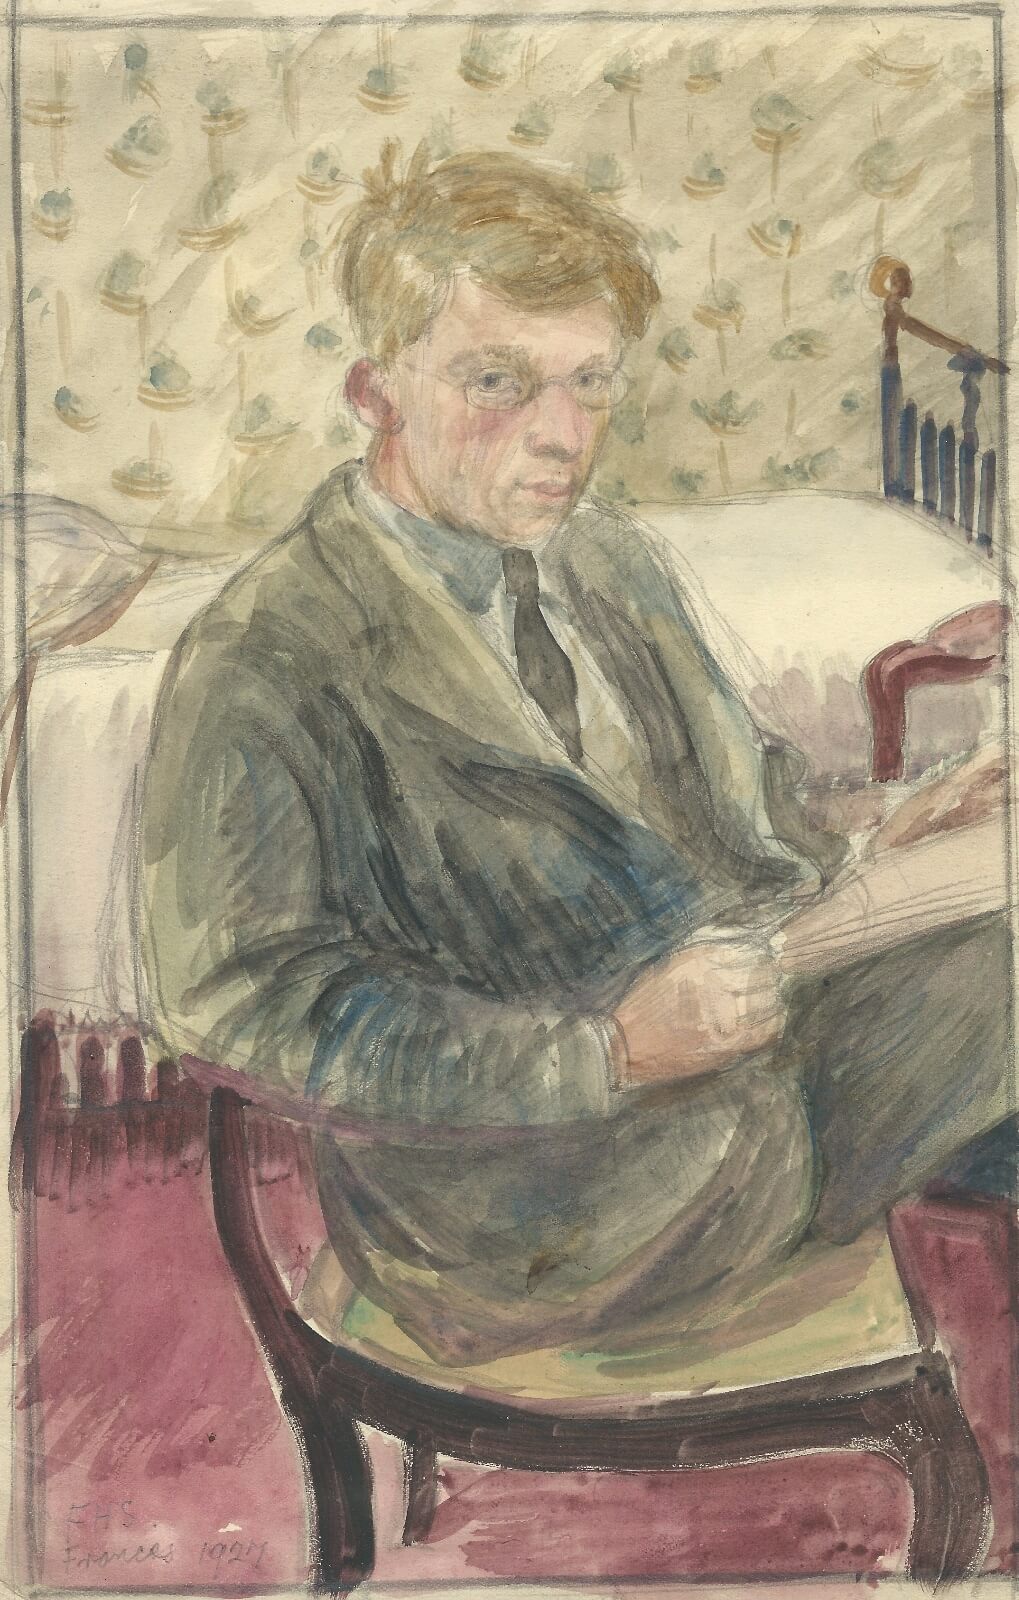 Francis Spear - Self Portrait sketching with a single bed and patterned wall paper in the background